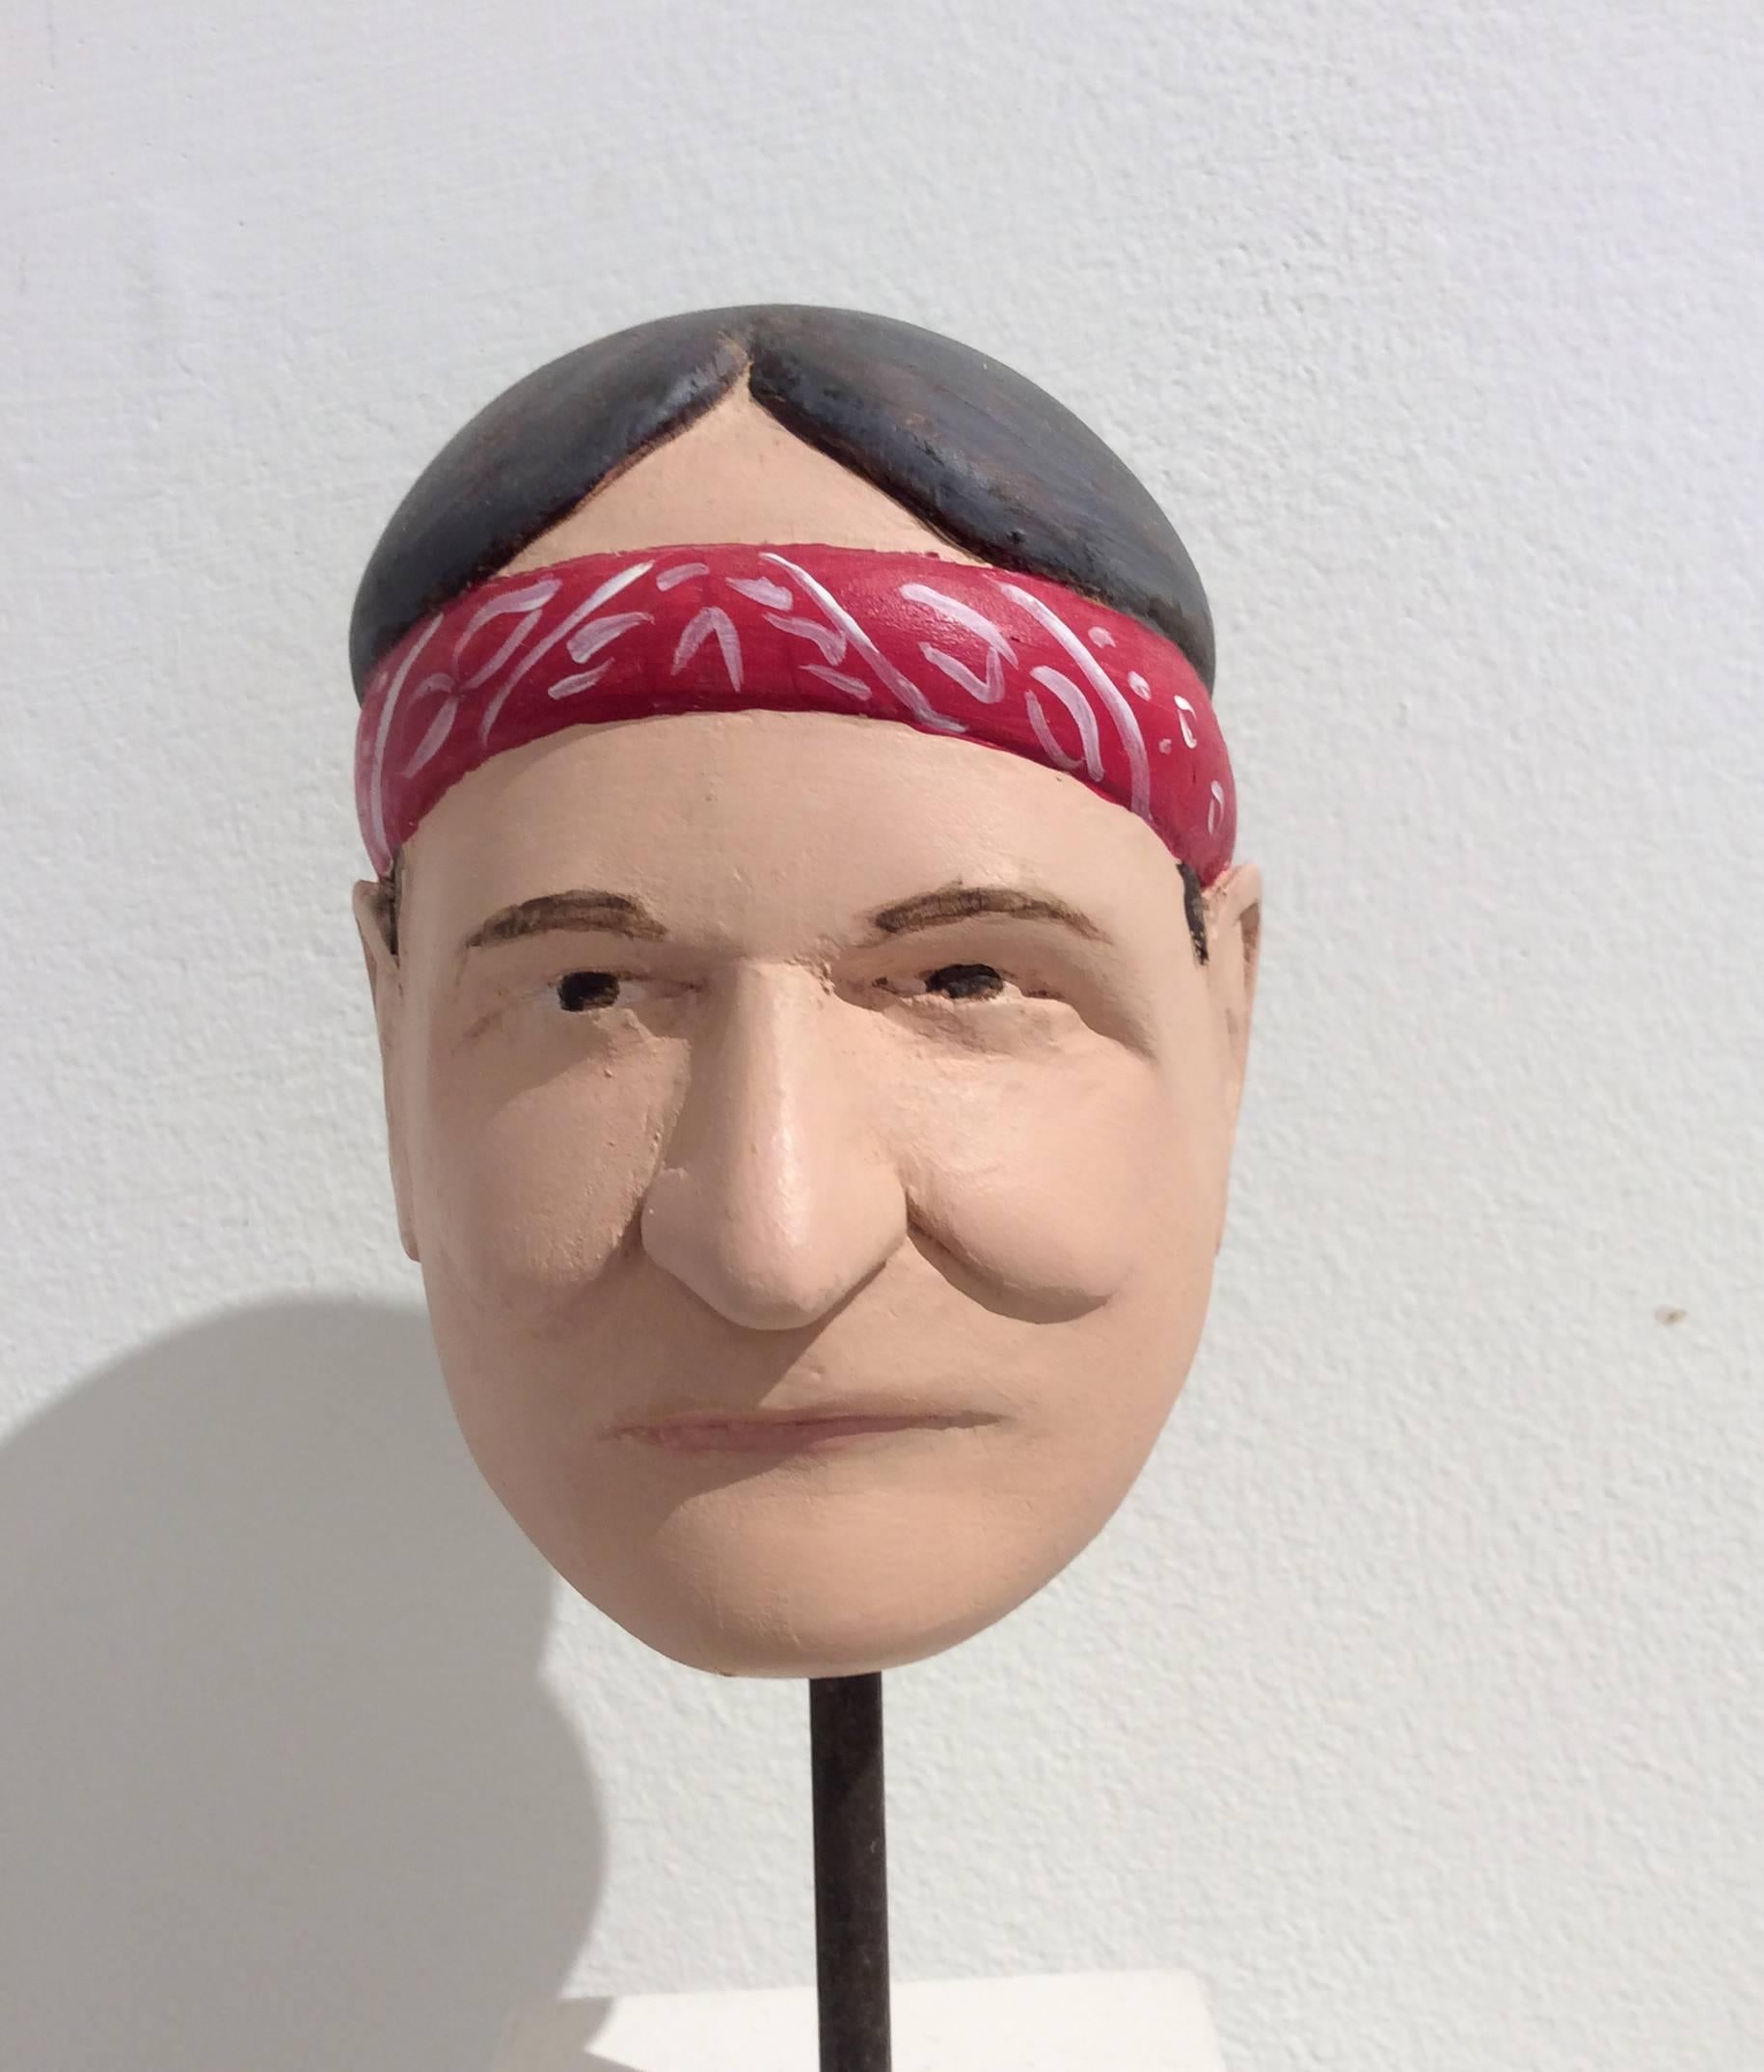 Willie Nelson (Carved Wooden bust of Willie Nelson on Pedestal w/ Red Bandanna) - Brown Figurative Sculpture by John Cross